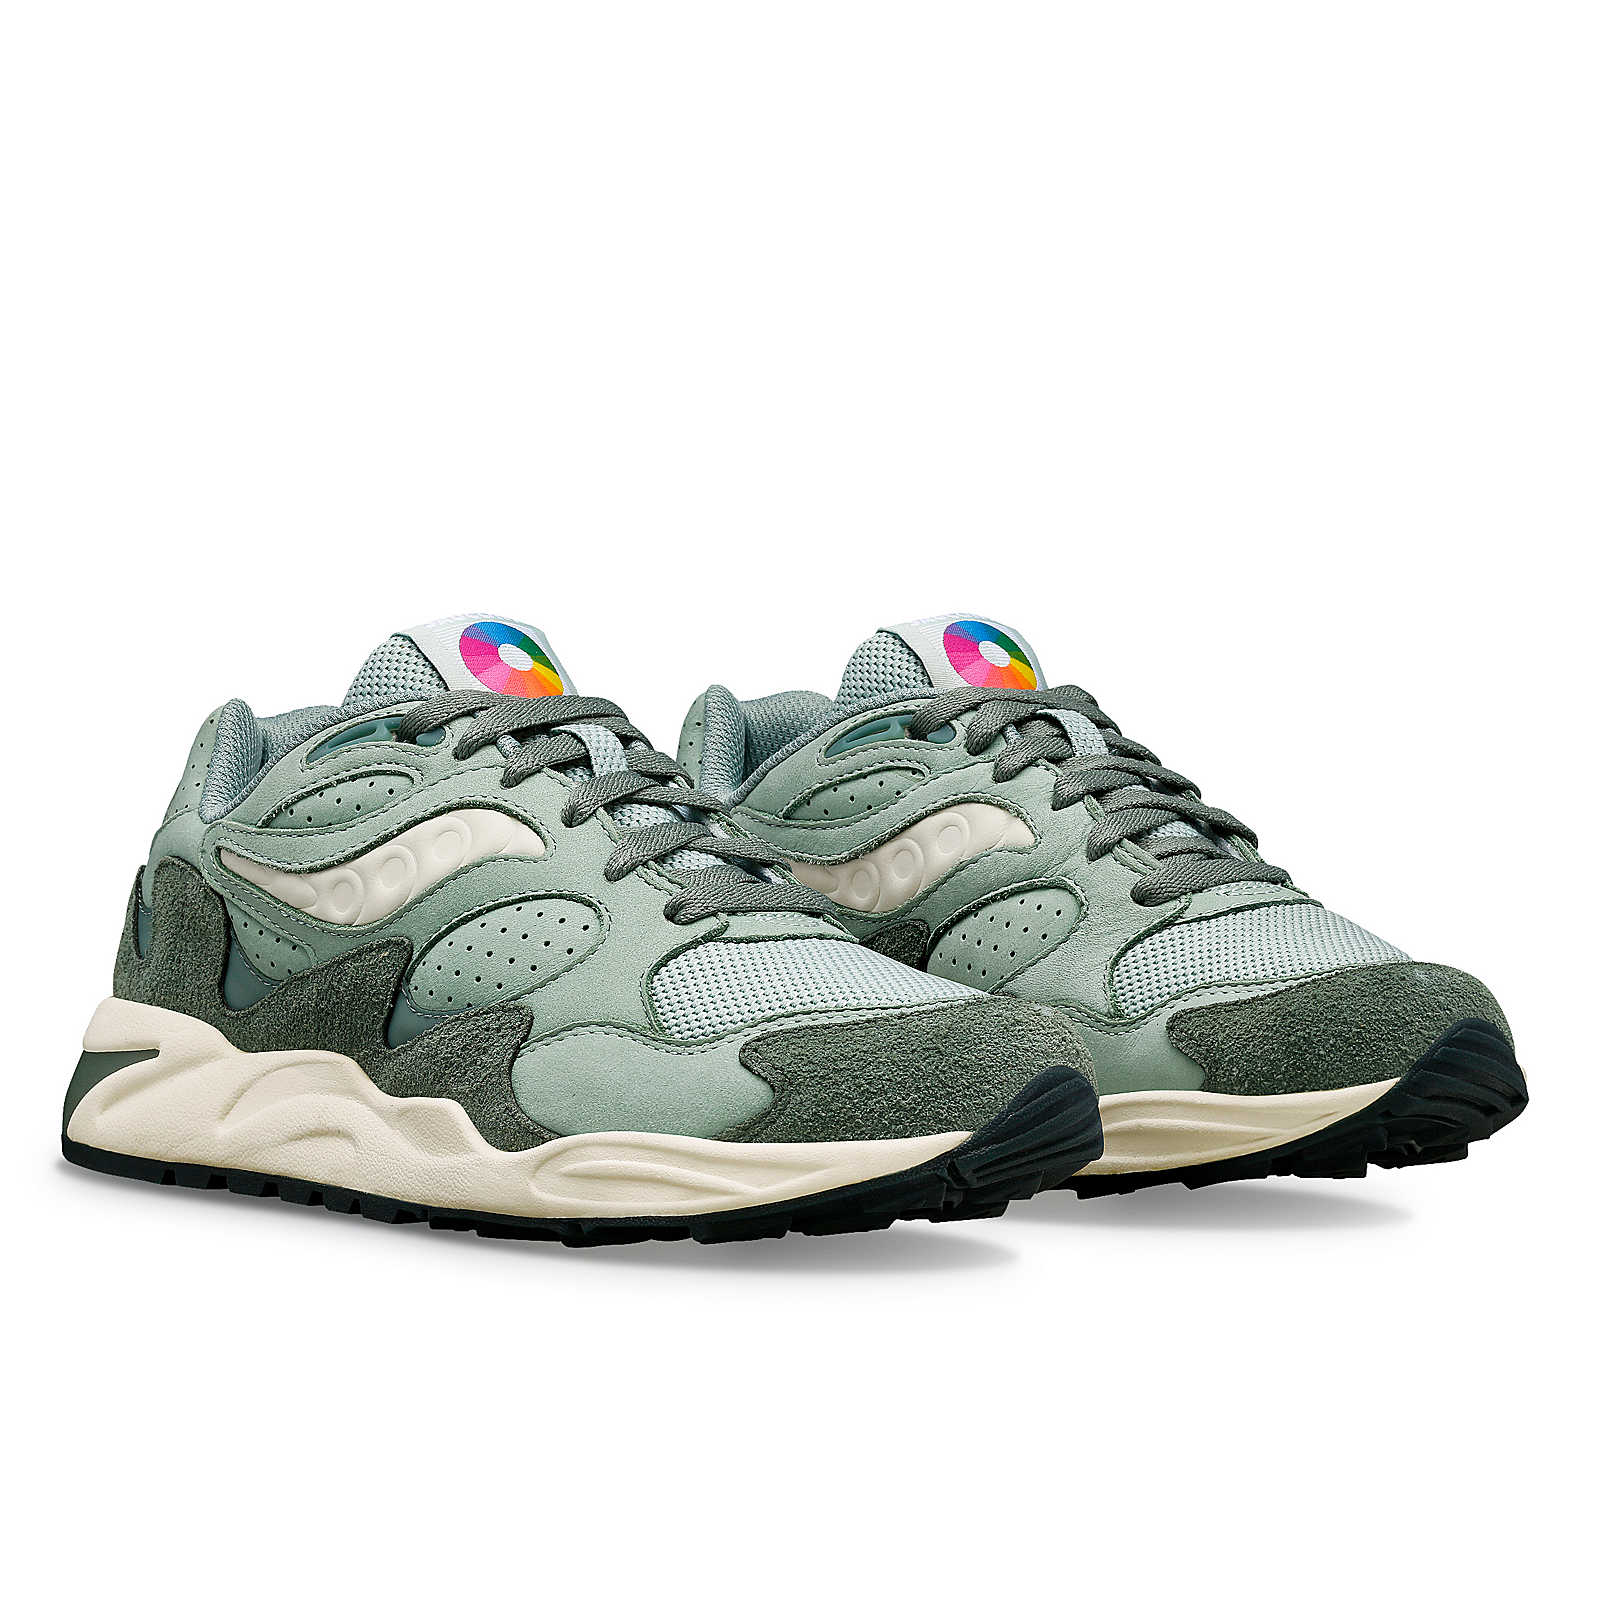 Last month END and s10681-20 Saucony dropped the White Noise Chromatic Sage 1